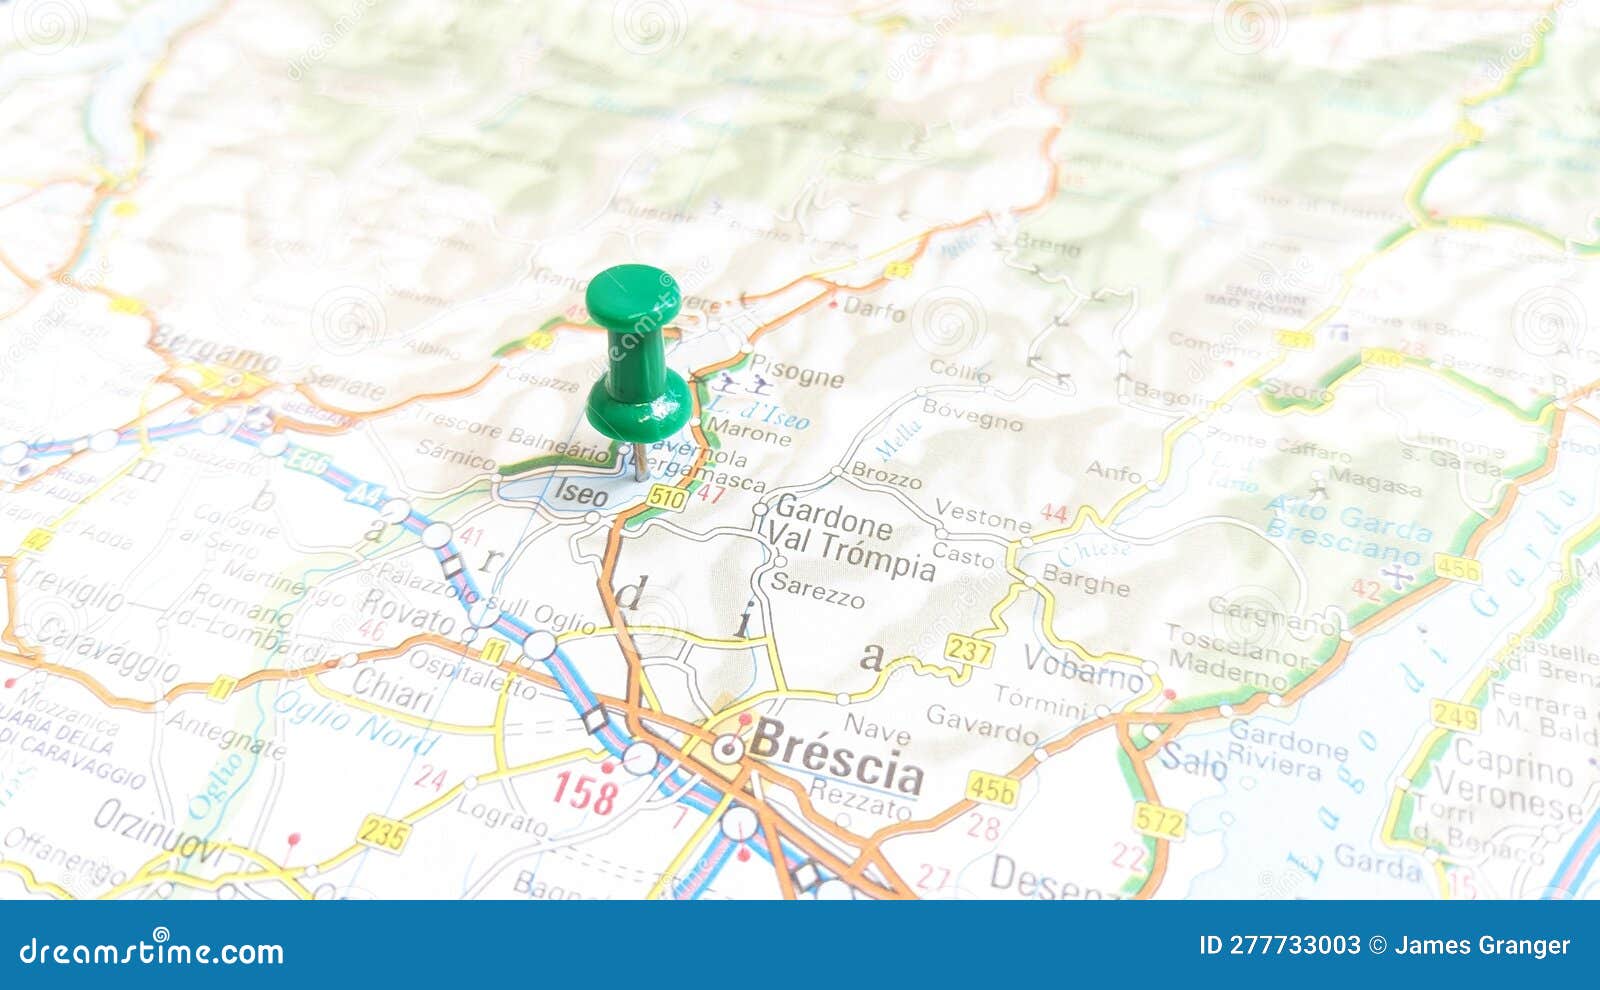 a green pin stuck in lake iseo on a map of italy